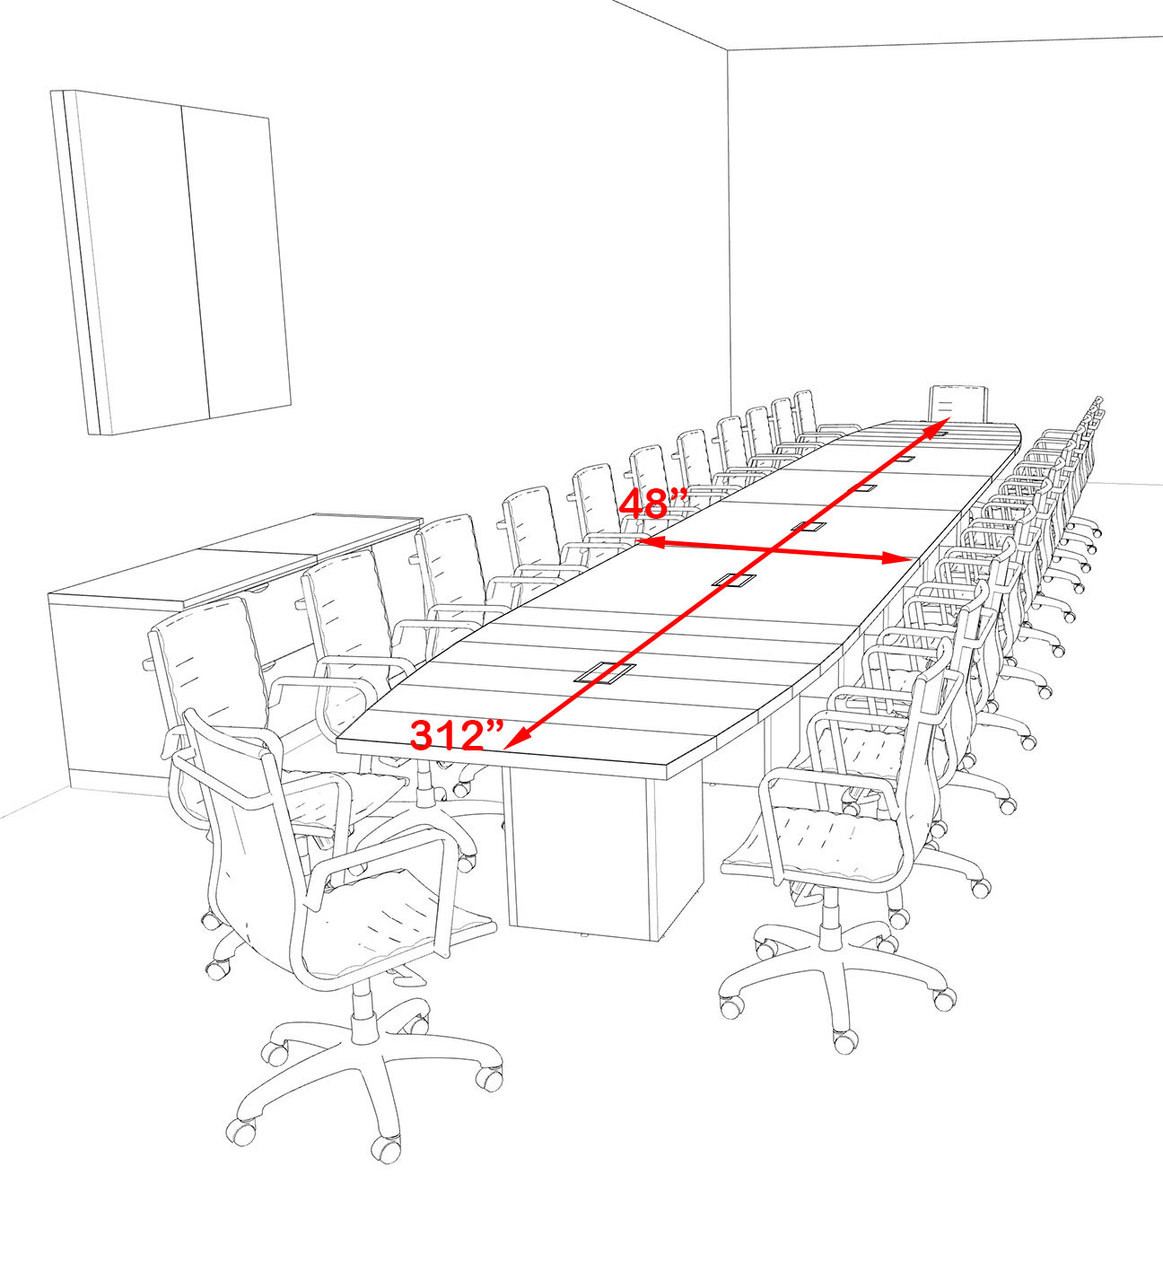 Modern Boat Shaped Cube Leg 26' Feet Conference Table, #OF-CON-CQ80